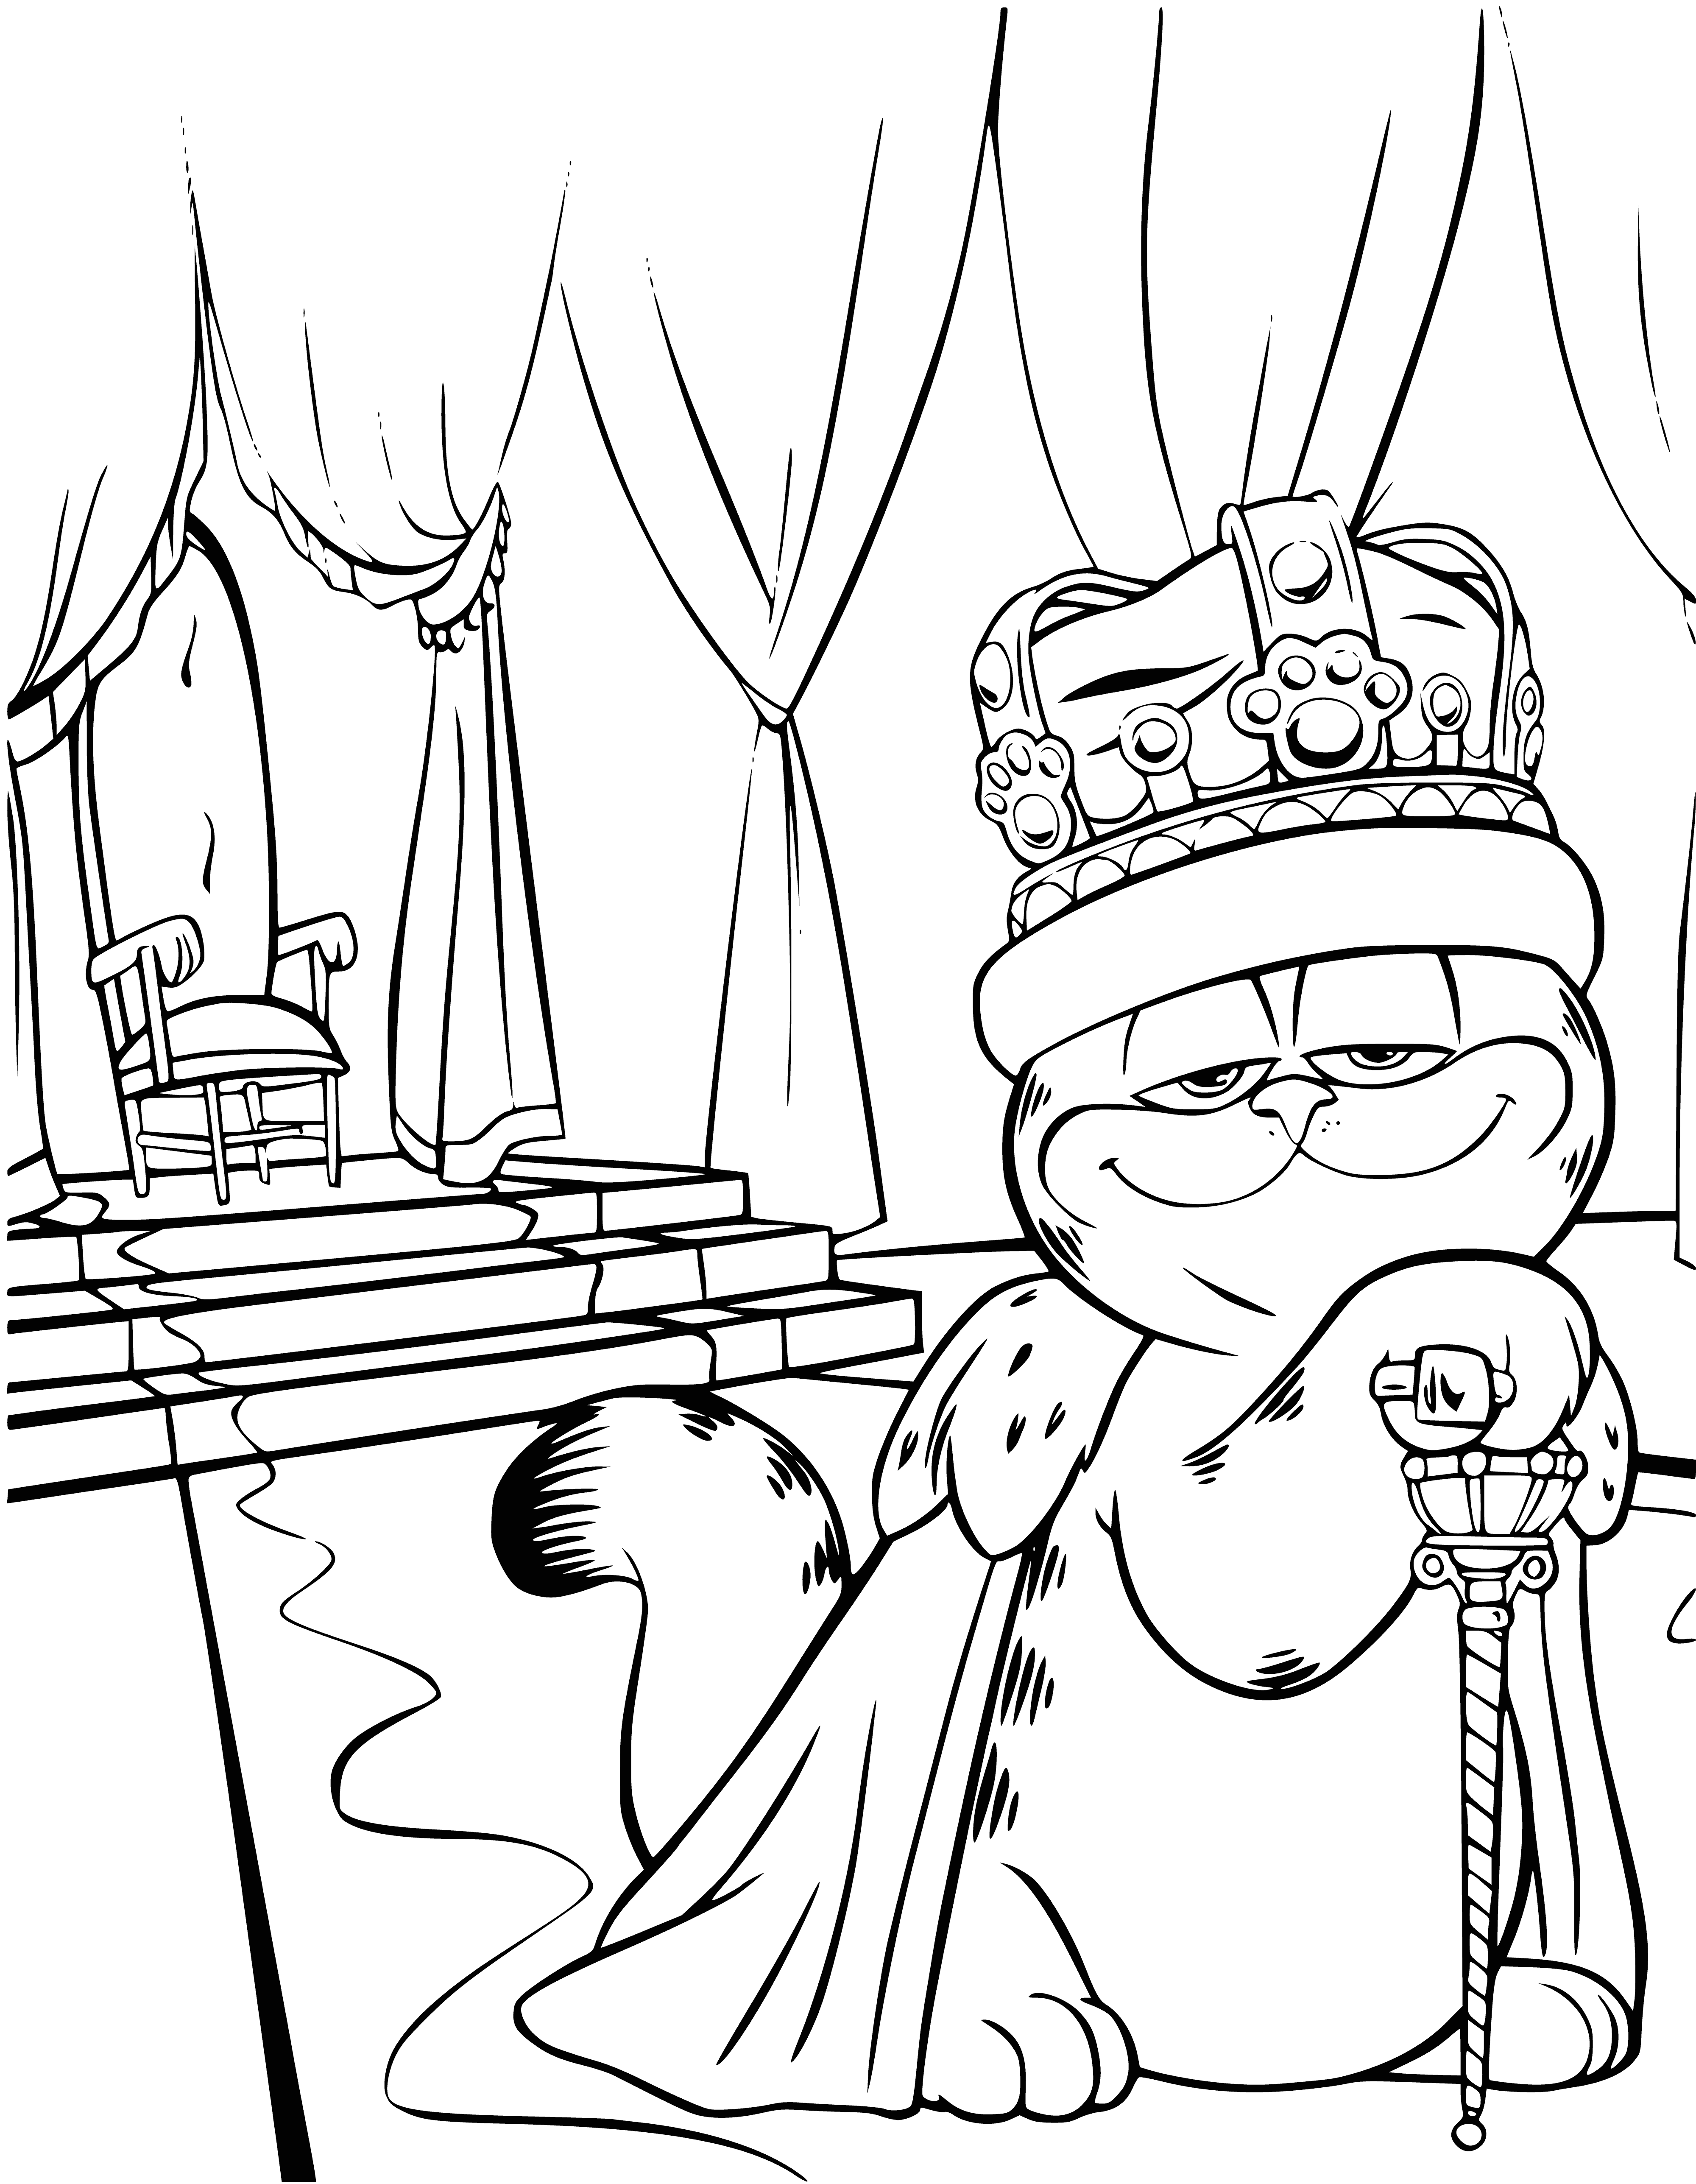 coloring page: Garfield stuffed animal sits on a blue pillow wearing a crown and cape, with its orange fur showing.